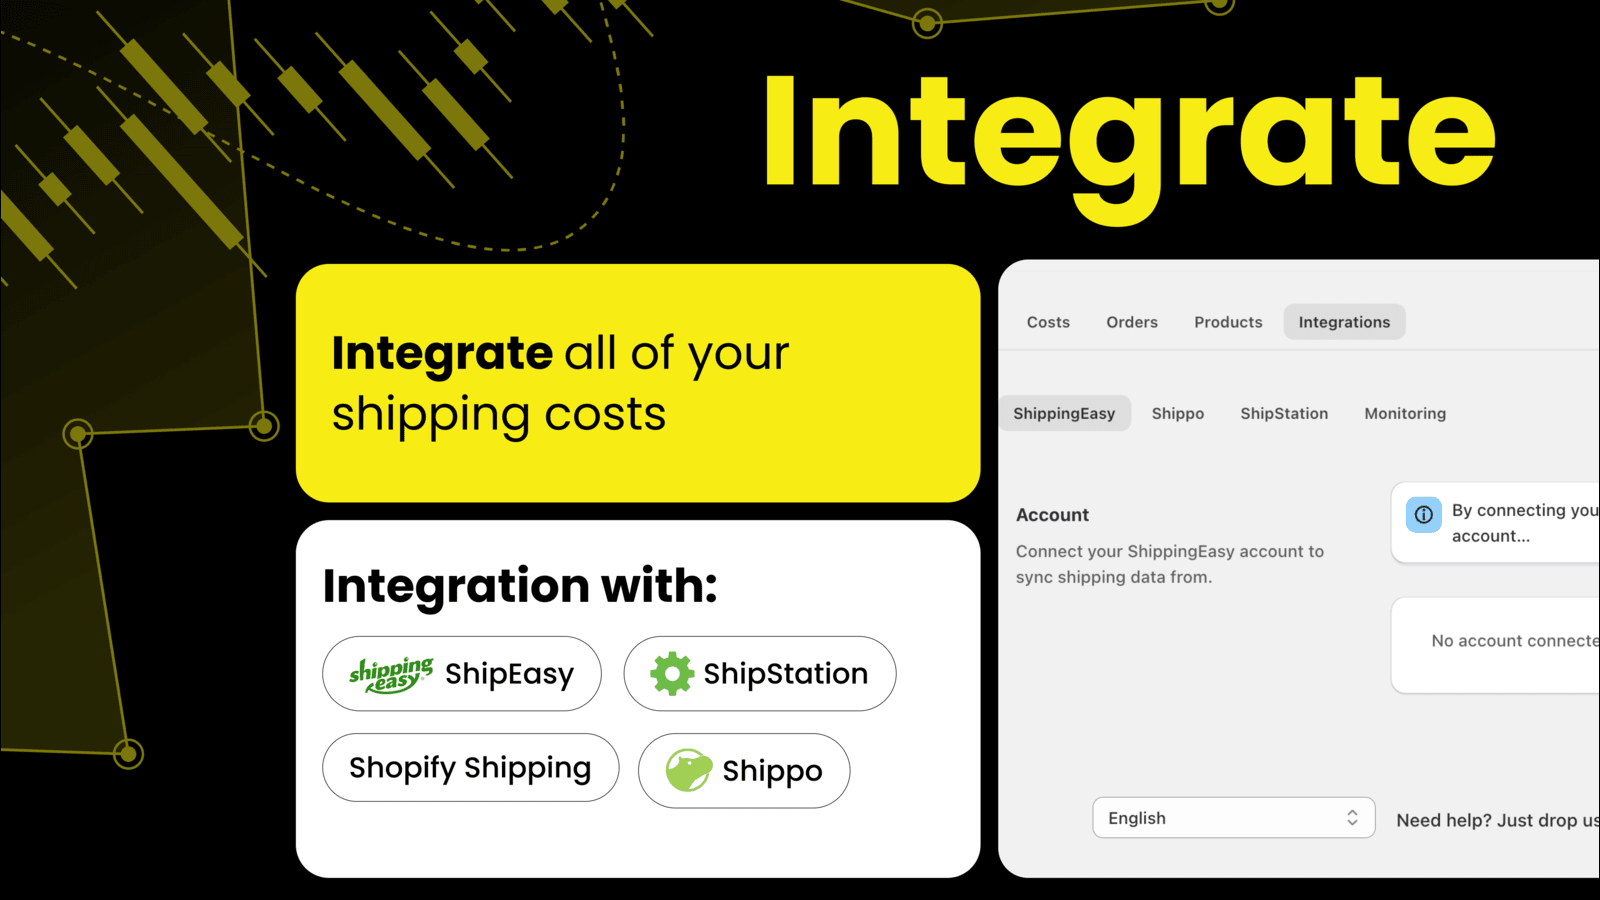 Integrate with ShipEasy, ShipStation, Shippo, Shopify Shipping